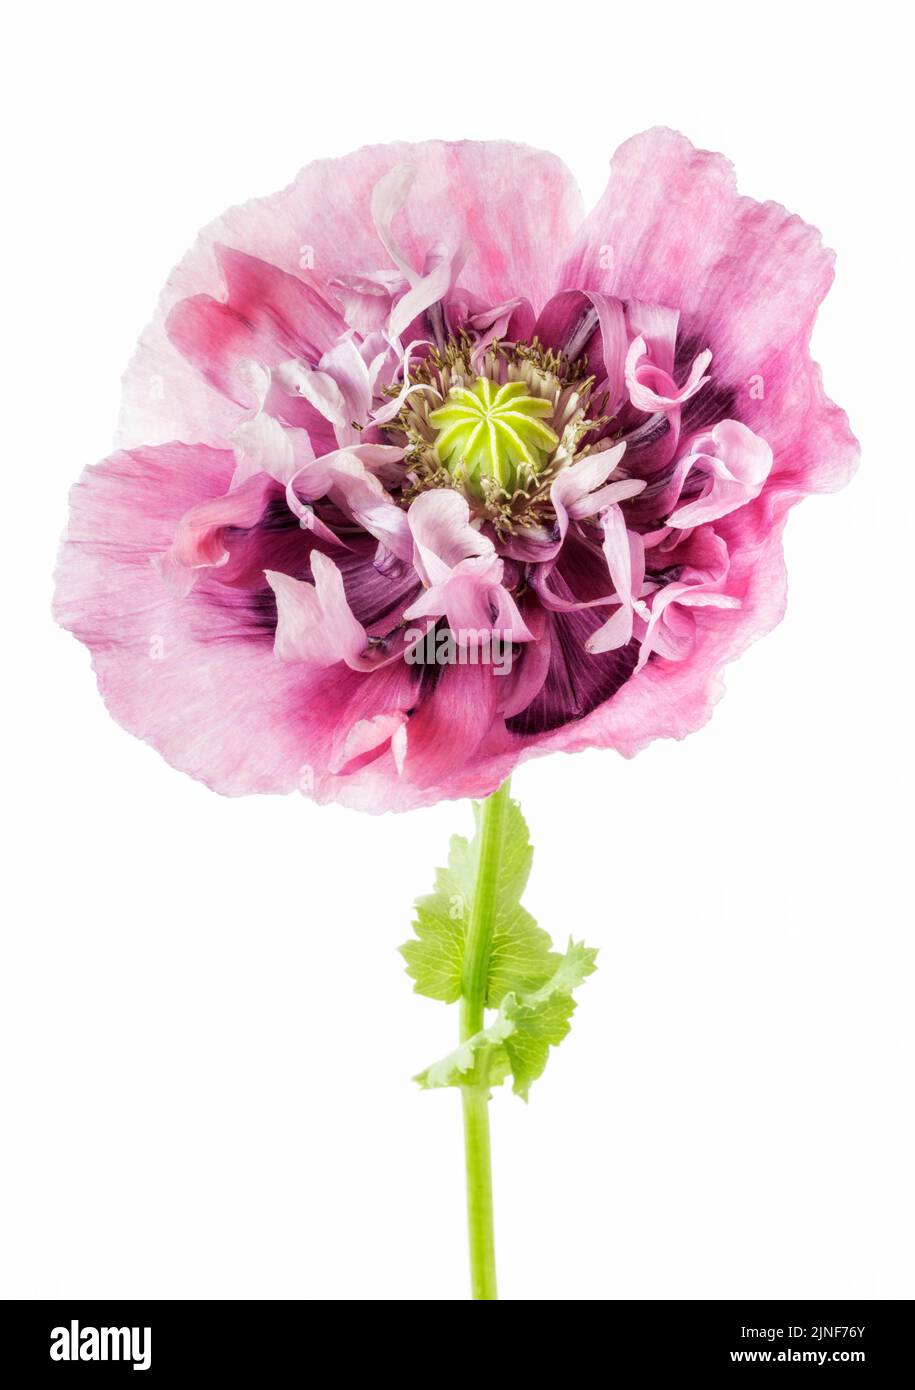 Pink double Poppy close up on white background Stock Photo